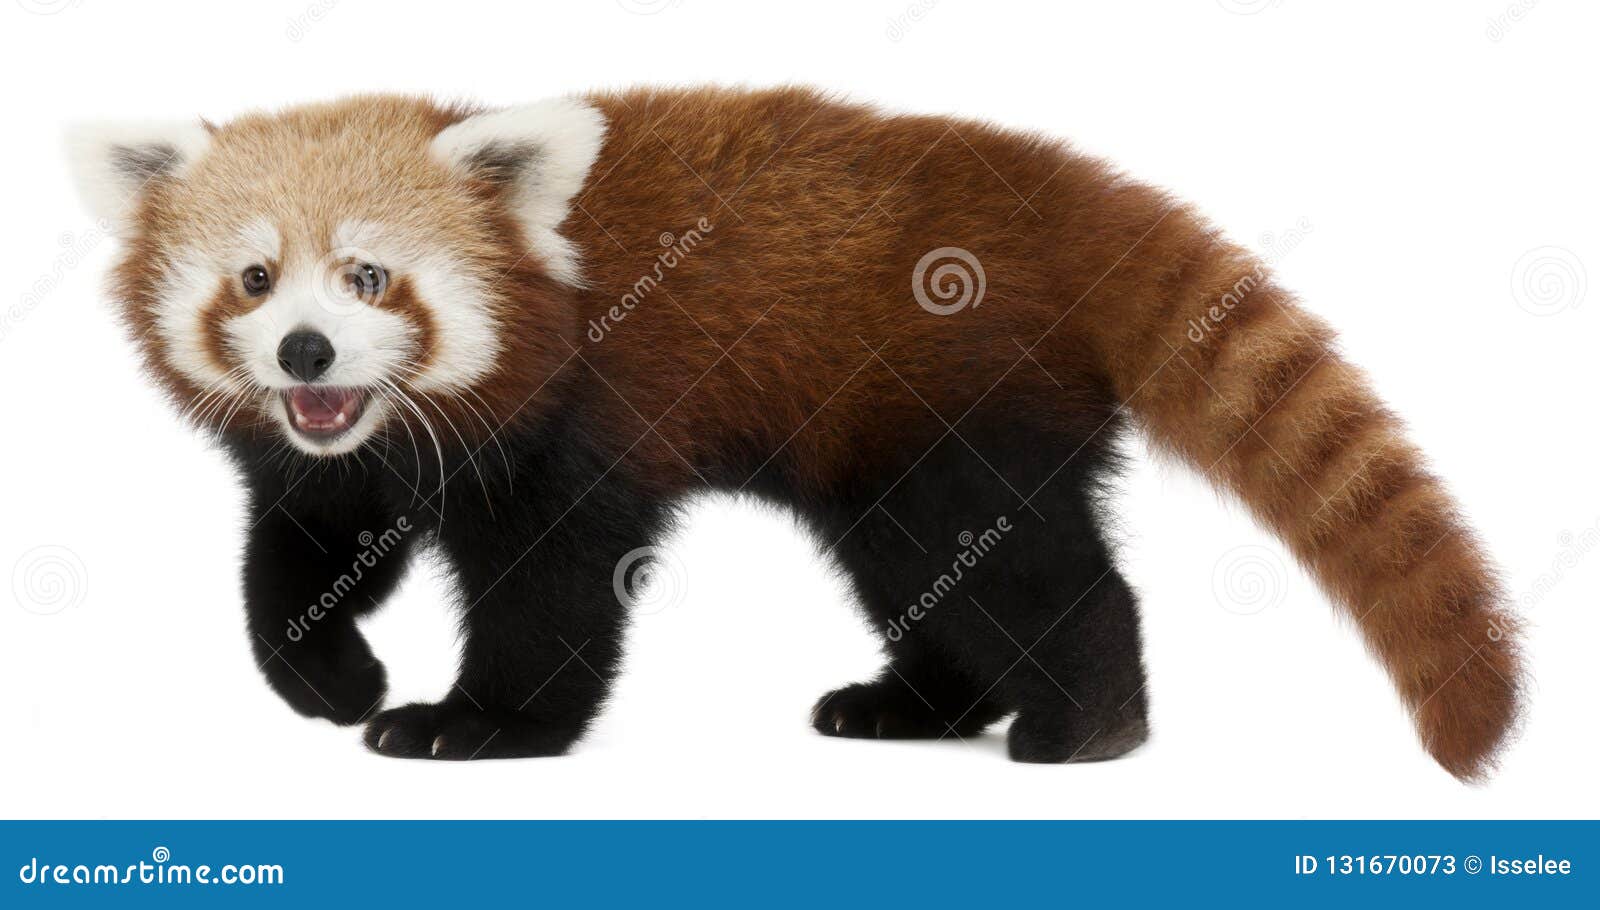 young red panda or shining cat, ailurus fulgens, 7 months old